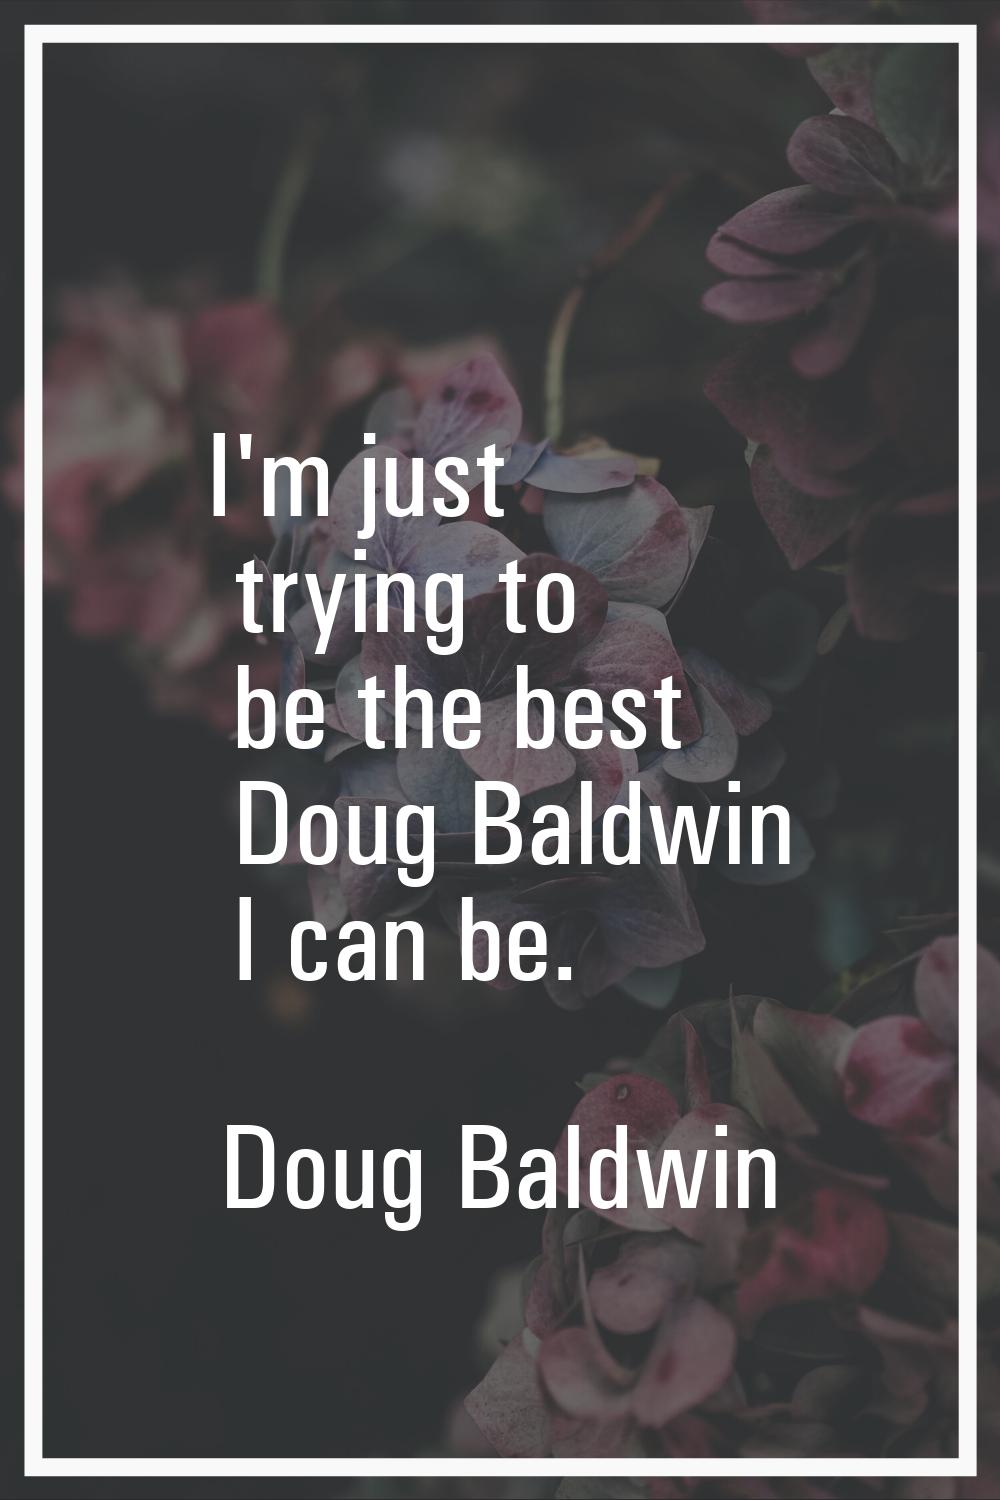 I'm just trying to be the best Doug Baldwin I can be.